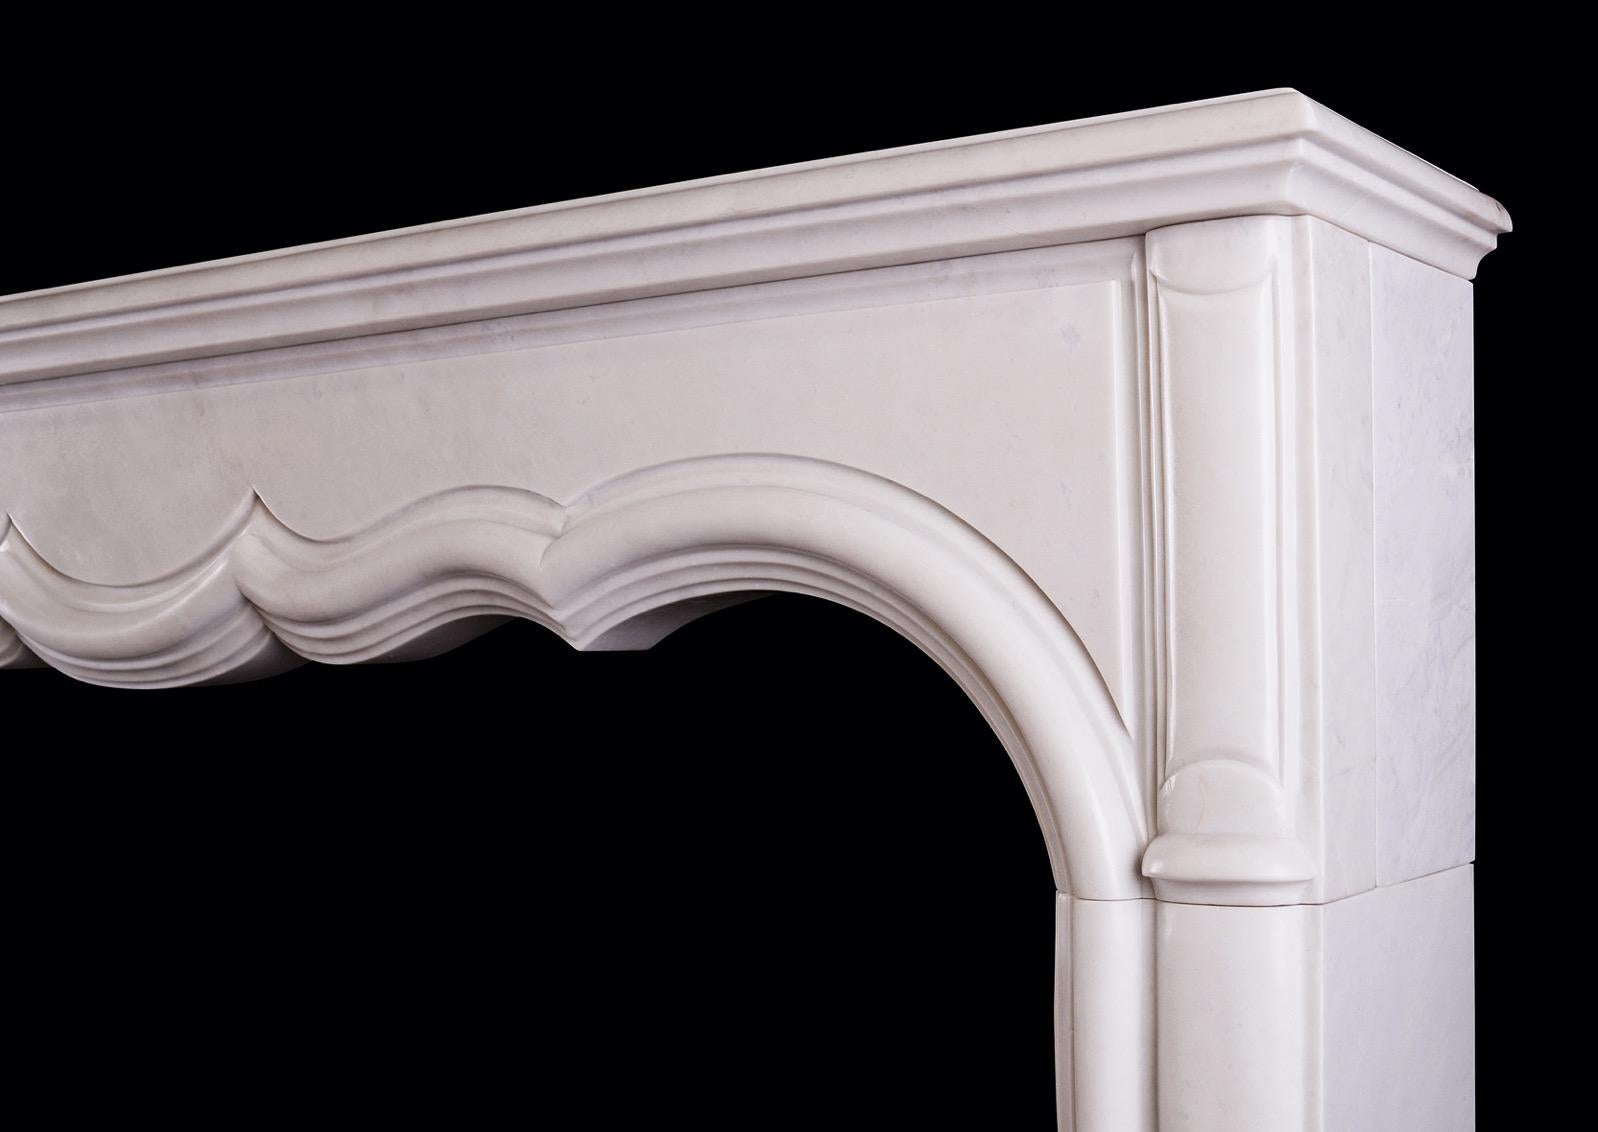 A white marble fireplace in the transitional French LXIV / LXV style. The shaped, panelled frieze with heavy inner moulding and elegant, shaped jambs below. Moulded shelf above. Mid to late 20th century.

Measures: Shelf width: 1678 mm 66